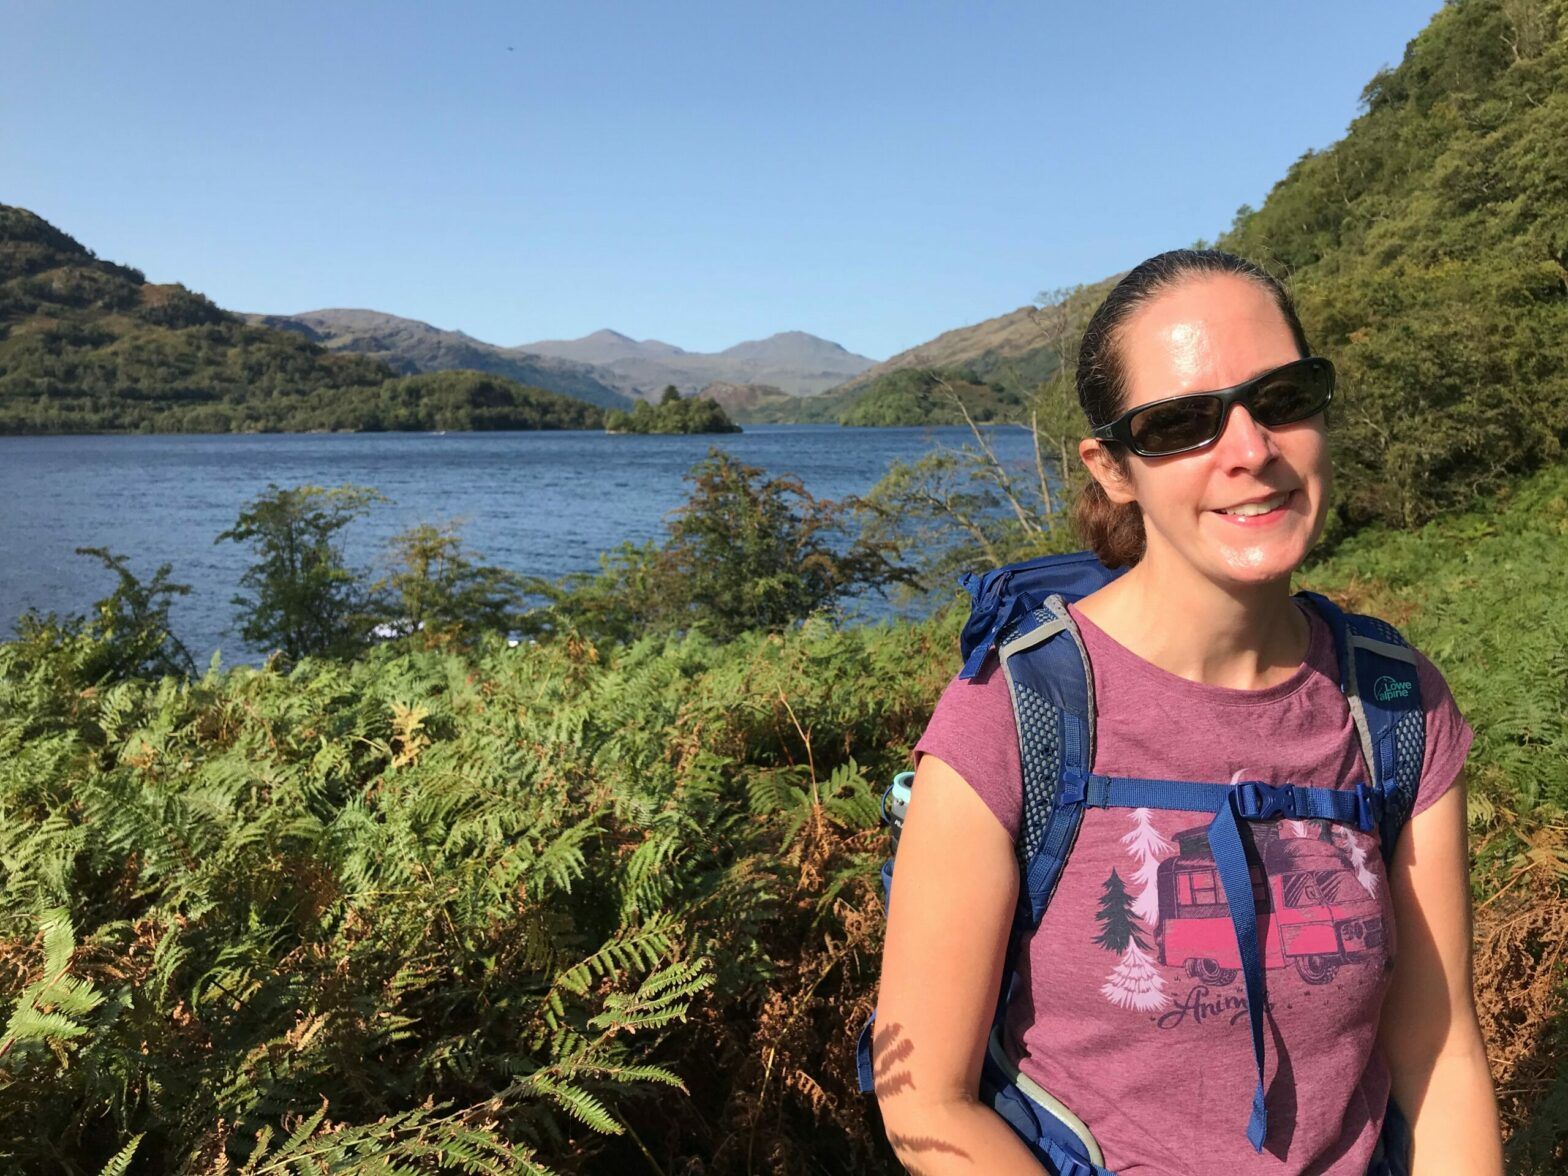 Staycation with EQ’s Victoria Hasler: Hiking in Scotland and leaving no trace